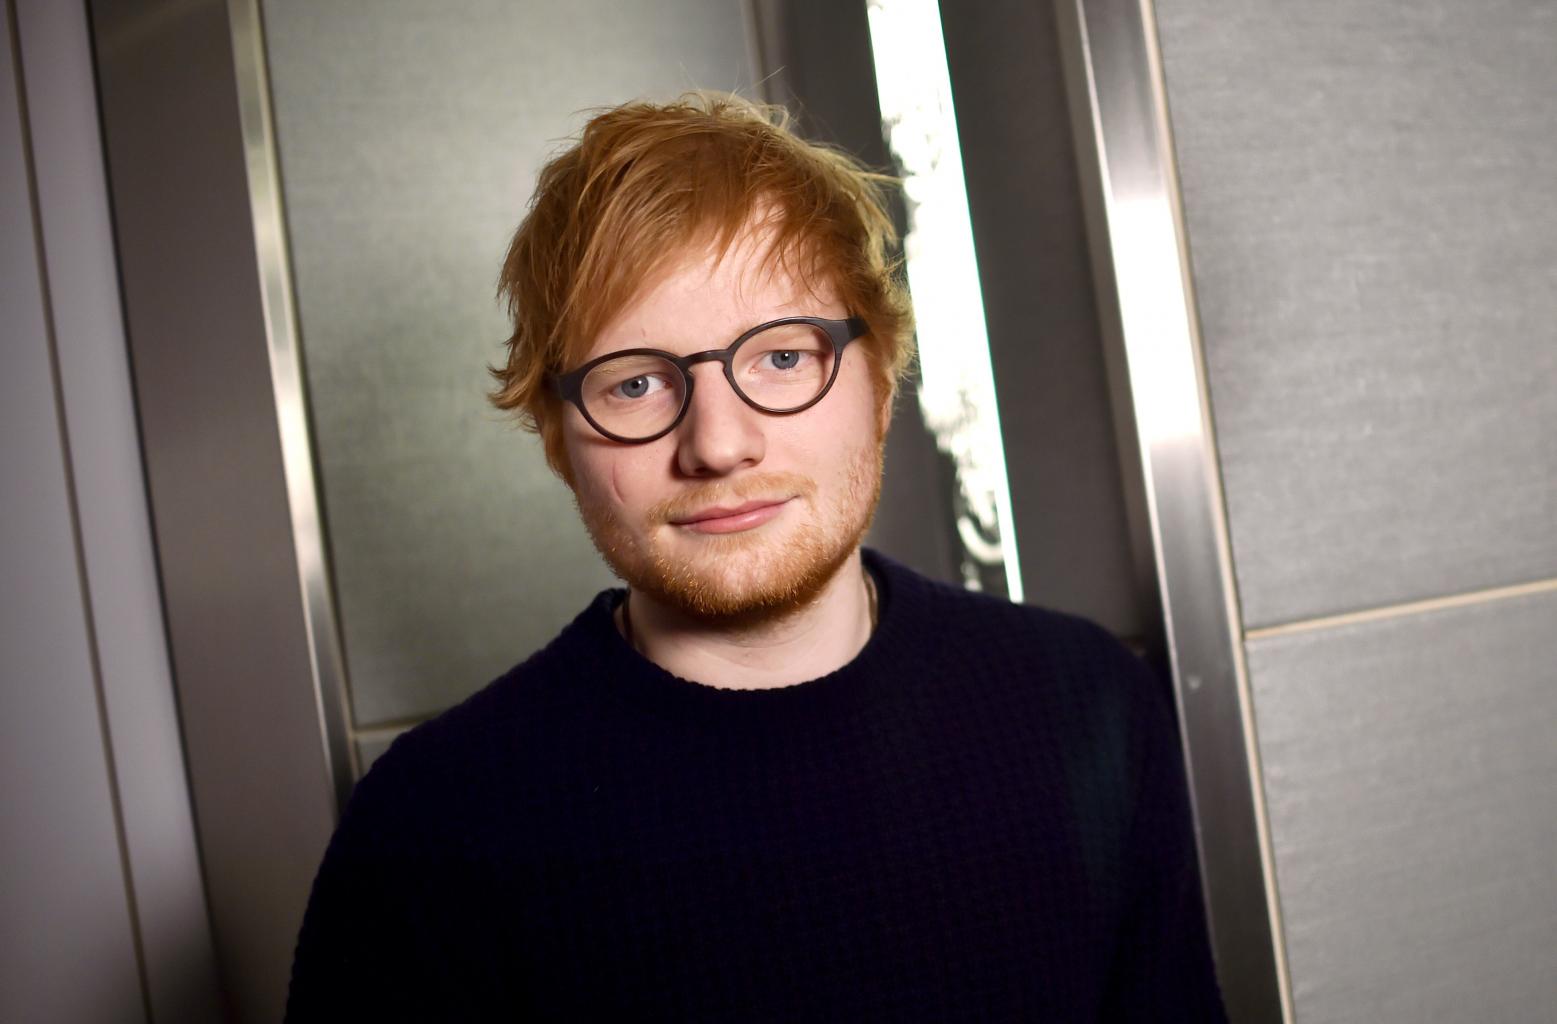 Ed Sheeran Says Taylor Swift Will Go Through Crazy Lengths To Protect Her Music